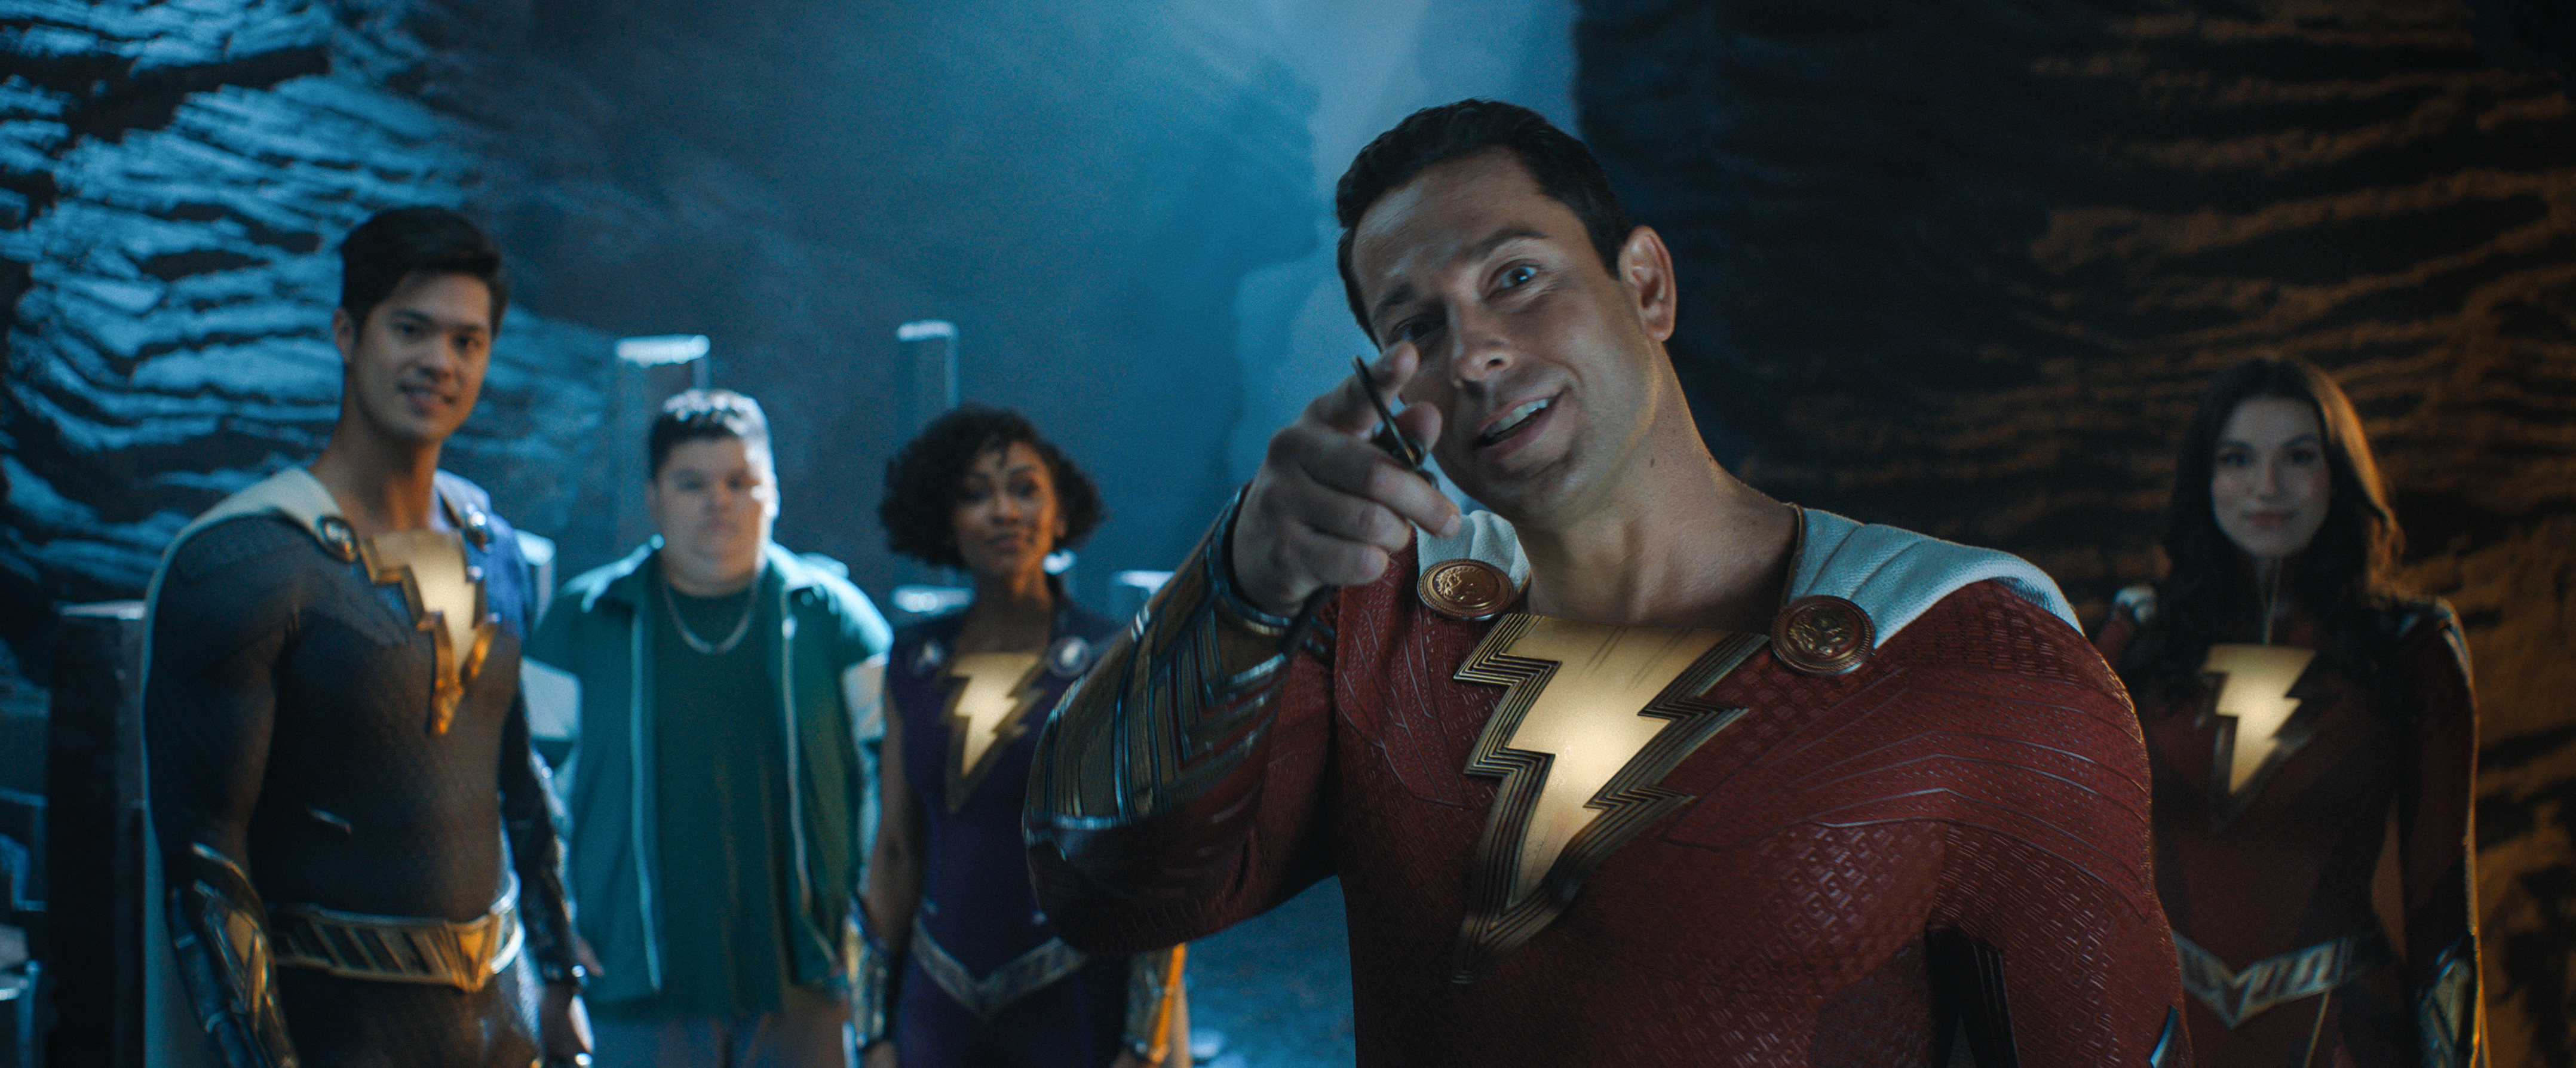 Zachary Levi as Shazam points into the camera and smiles, with members of his hero family behind him, in Shazam! Fury of the Gods